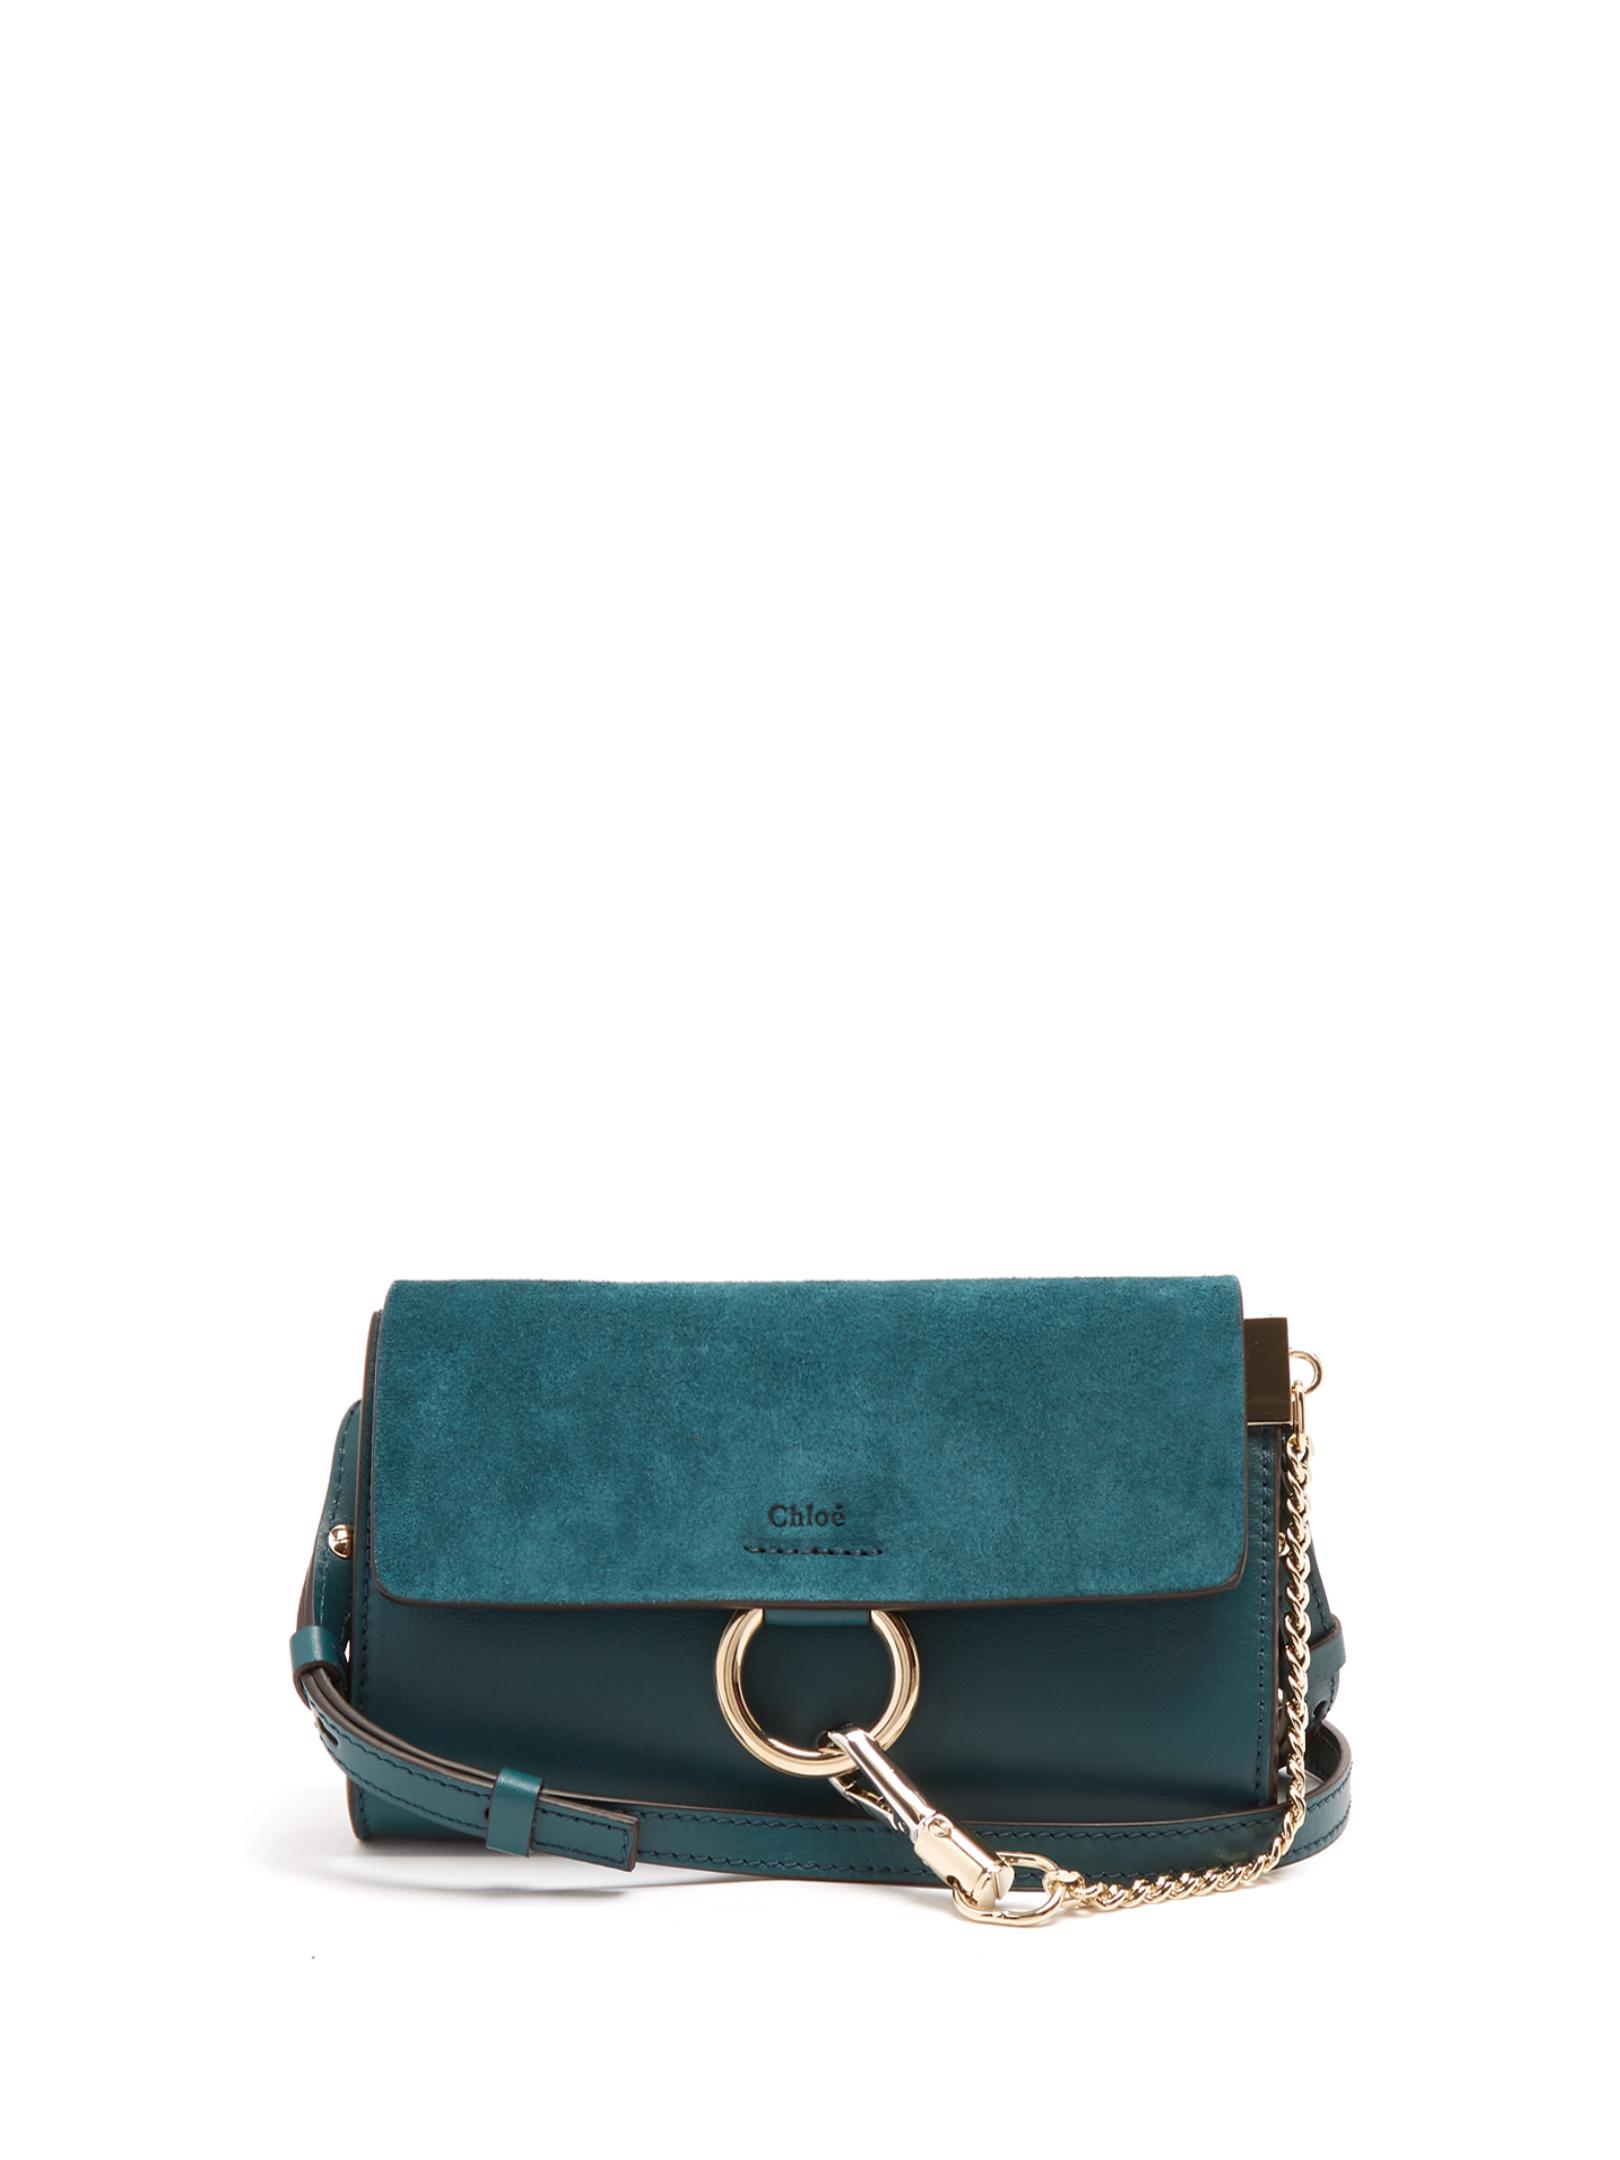 Chloé Faye Mini Leather And Suede Cross-body Bag in Green | Lyst